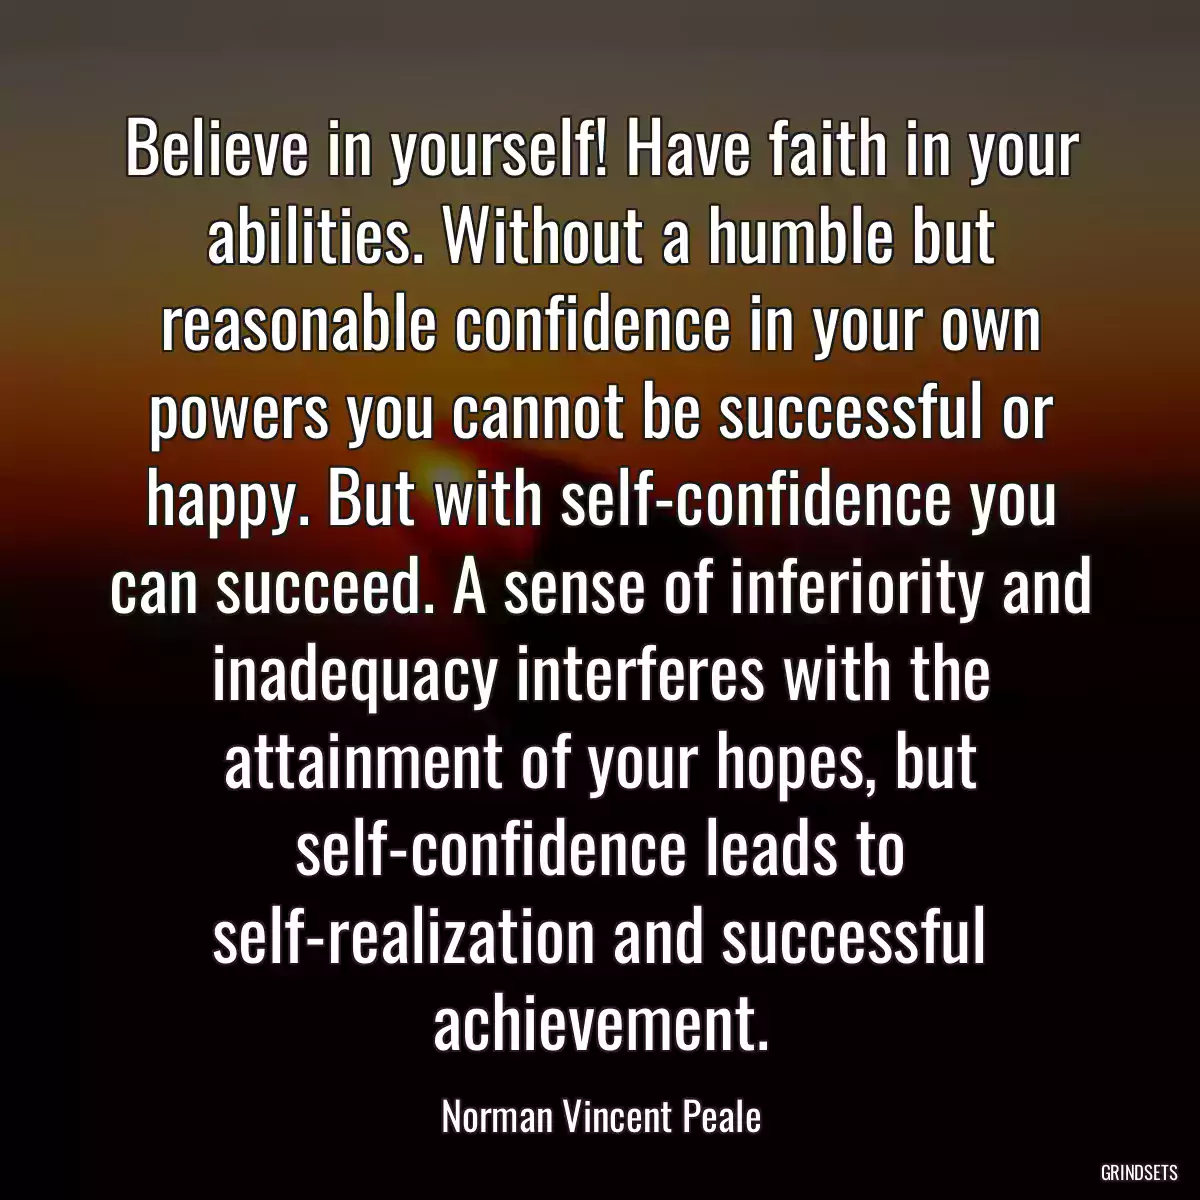 Believe in yourself! Have faith in your abilities. Without a humble but reasonable confidence in your own powers you cannot be successful or happy. But with self-confidence you can succeed. A sense of inferiority and inadequacy interferes with the attainment of your hopes, but self-confidence leads to self-realization and successful achievement.